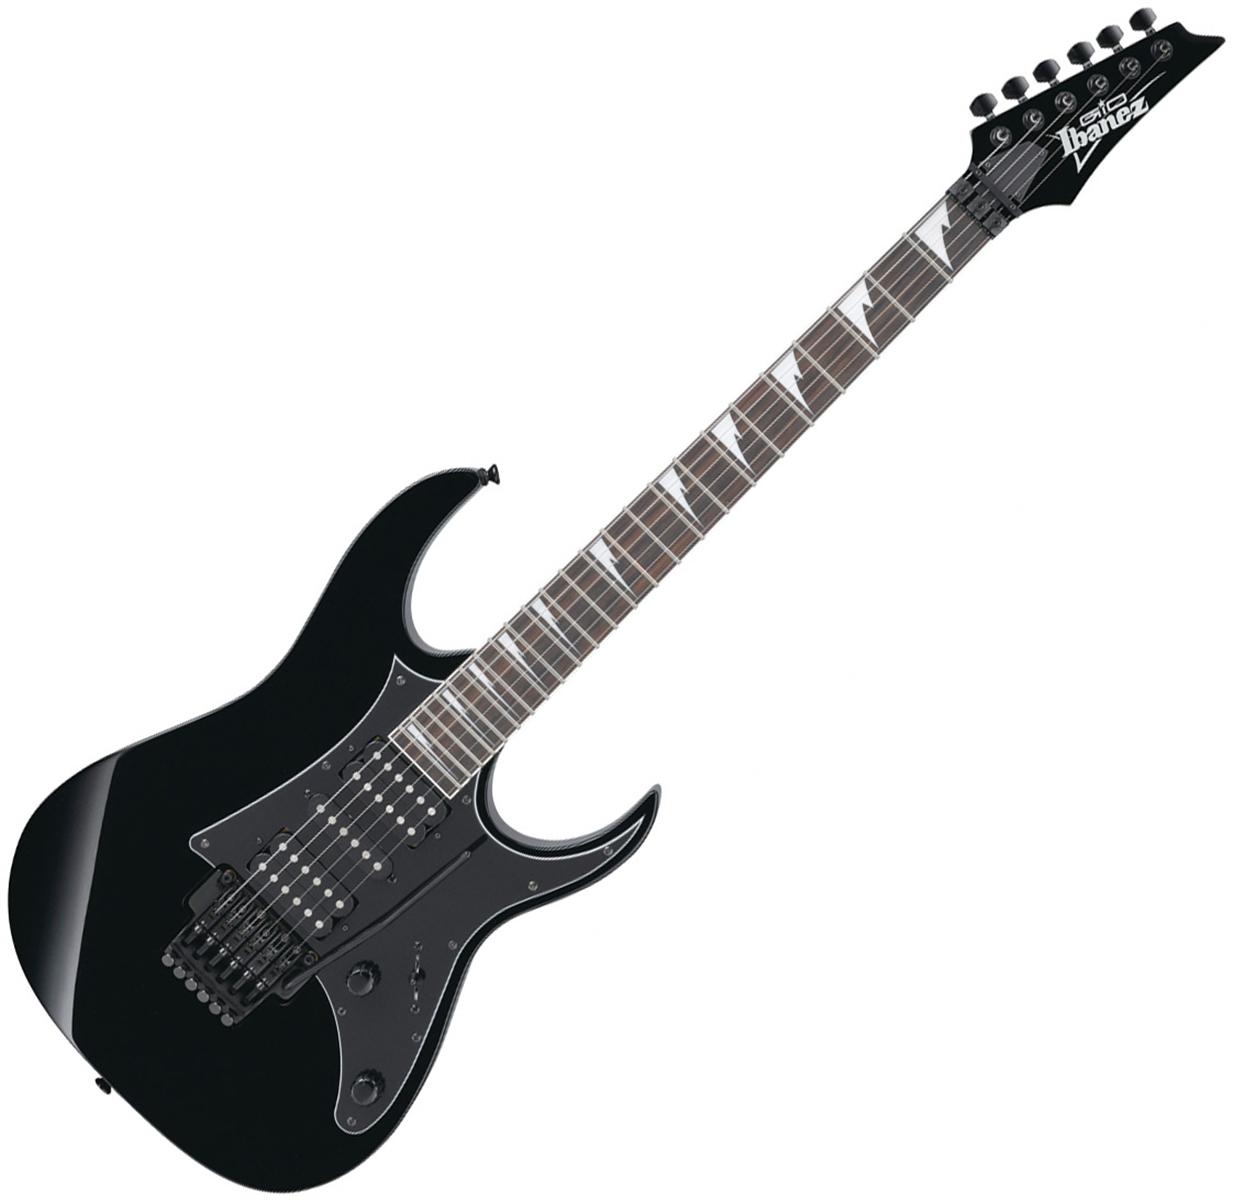 Electric Guitar Clipart Black And White Free download on